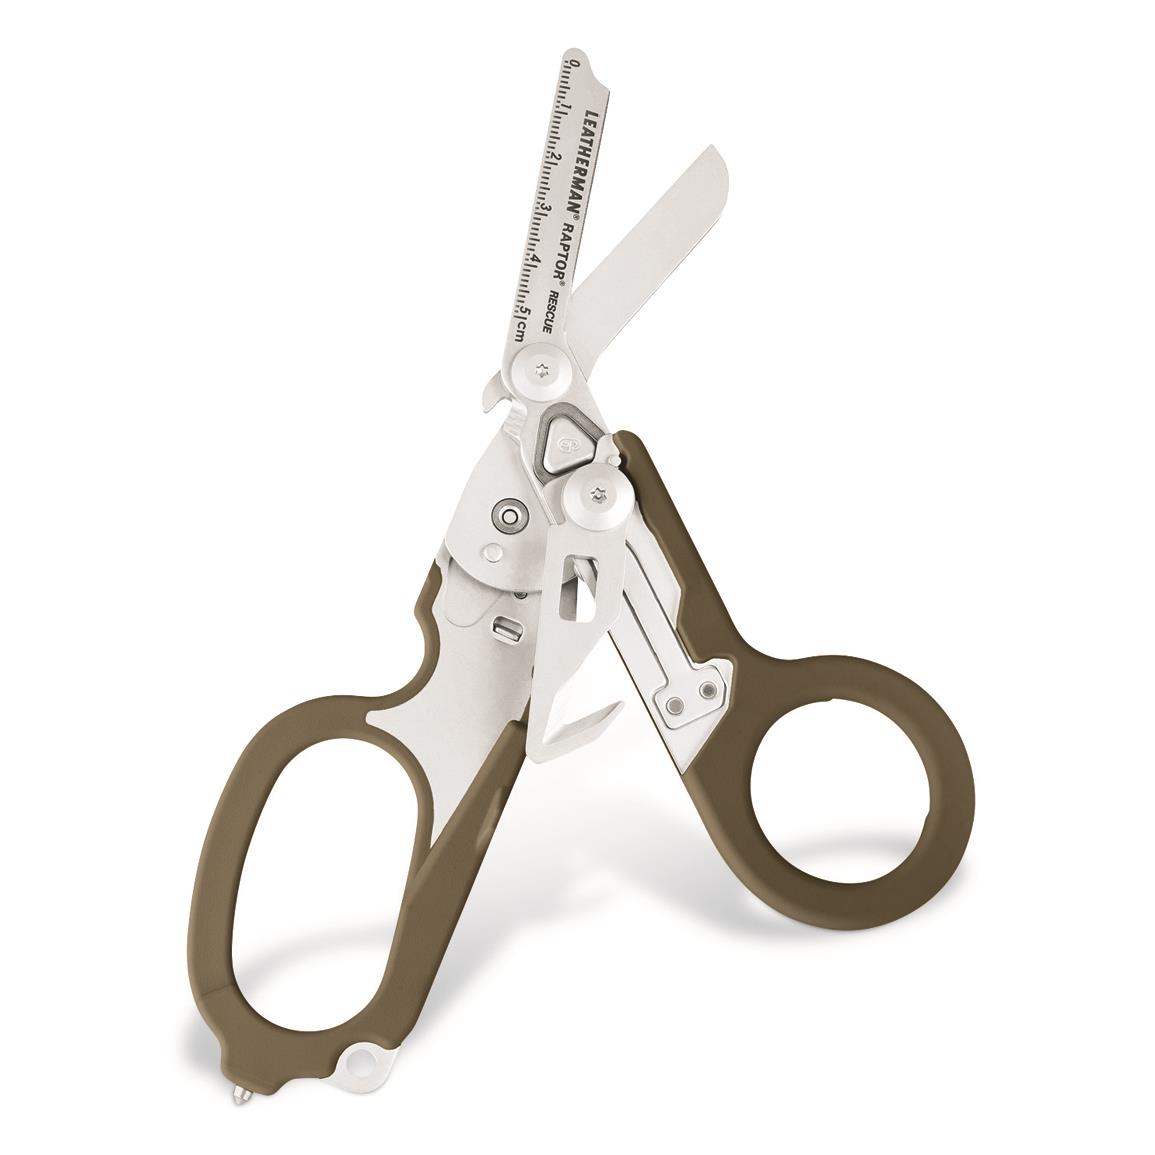 Leatherman Raptor Rescue Foldable Shears with Holster, Coyote